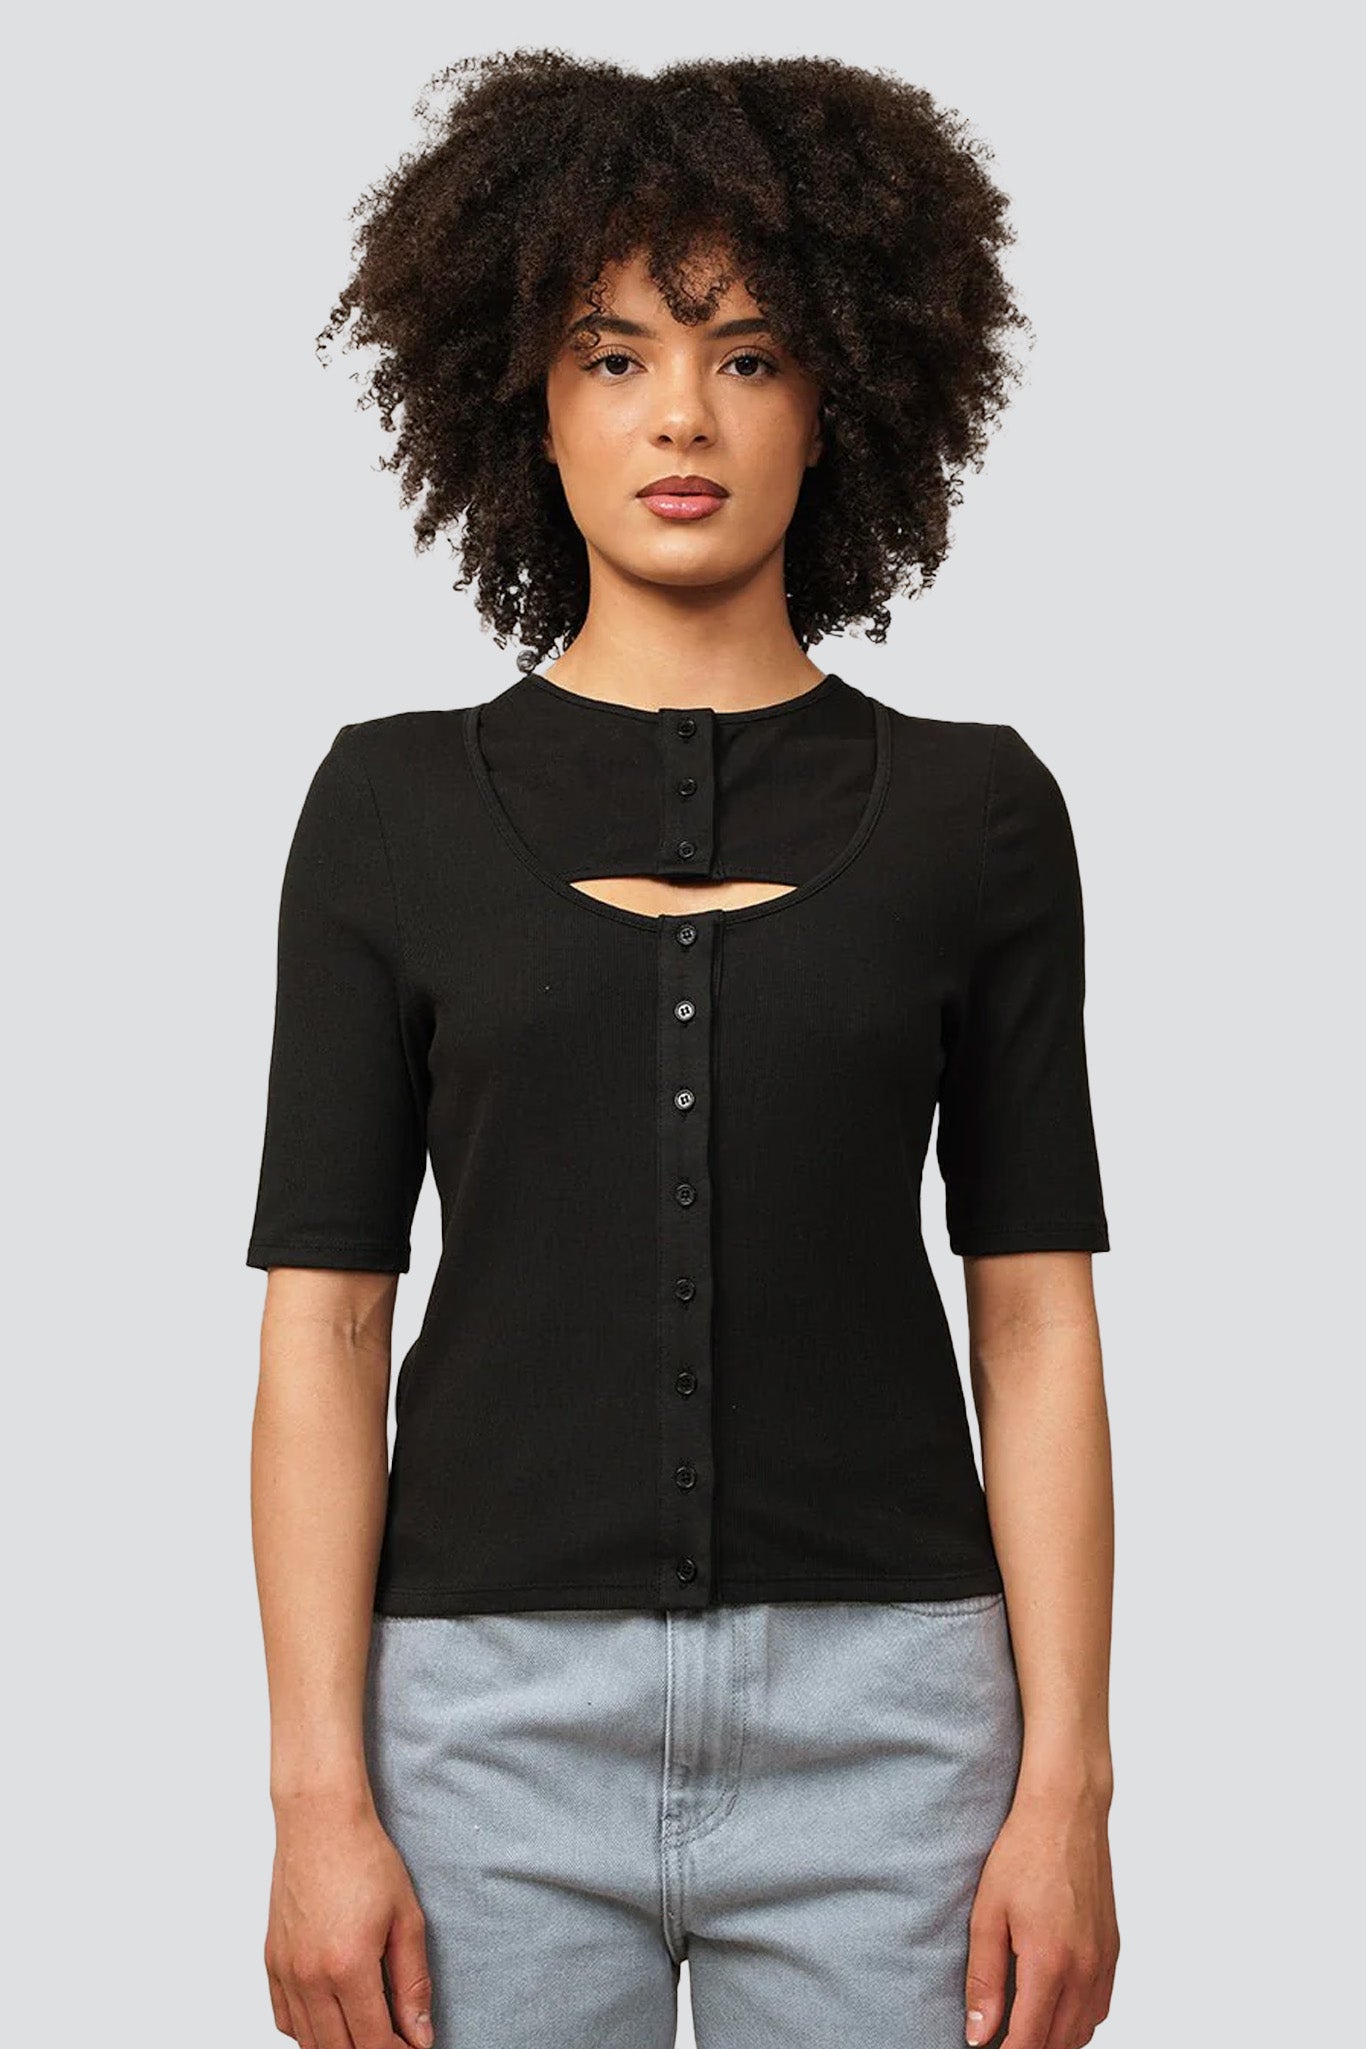 Black Ribbed Button Cardigan Top